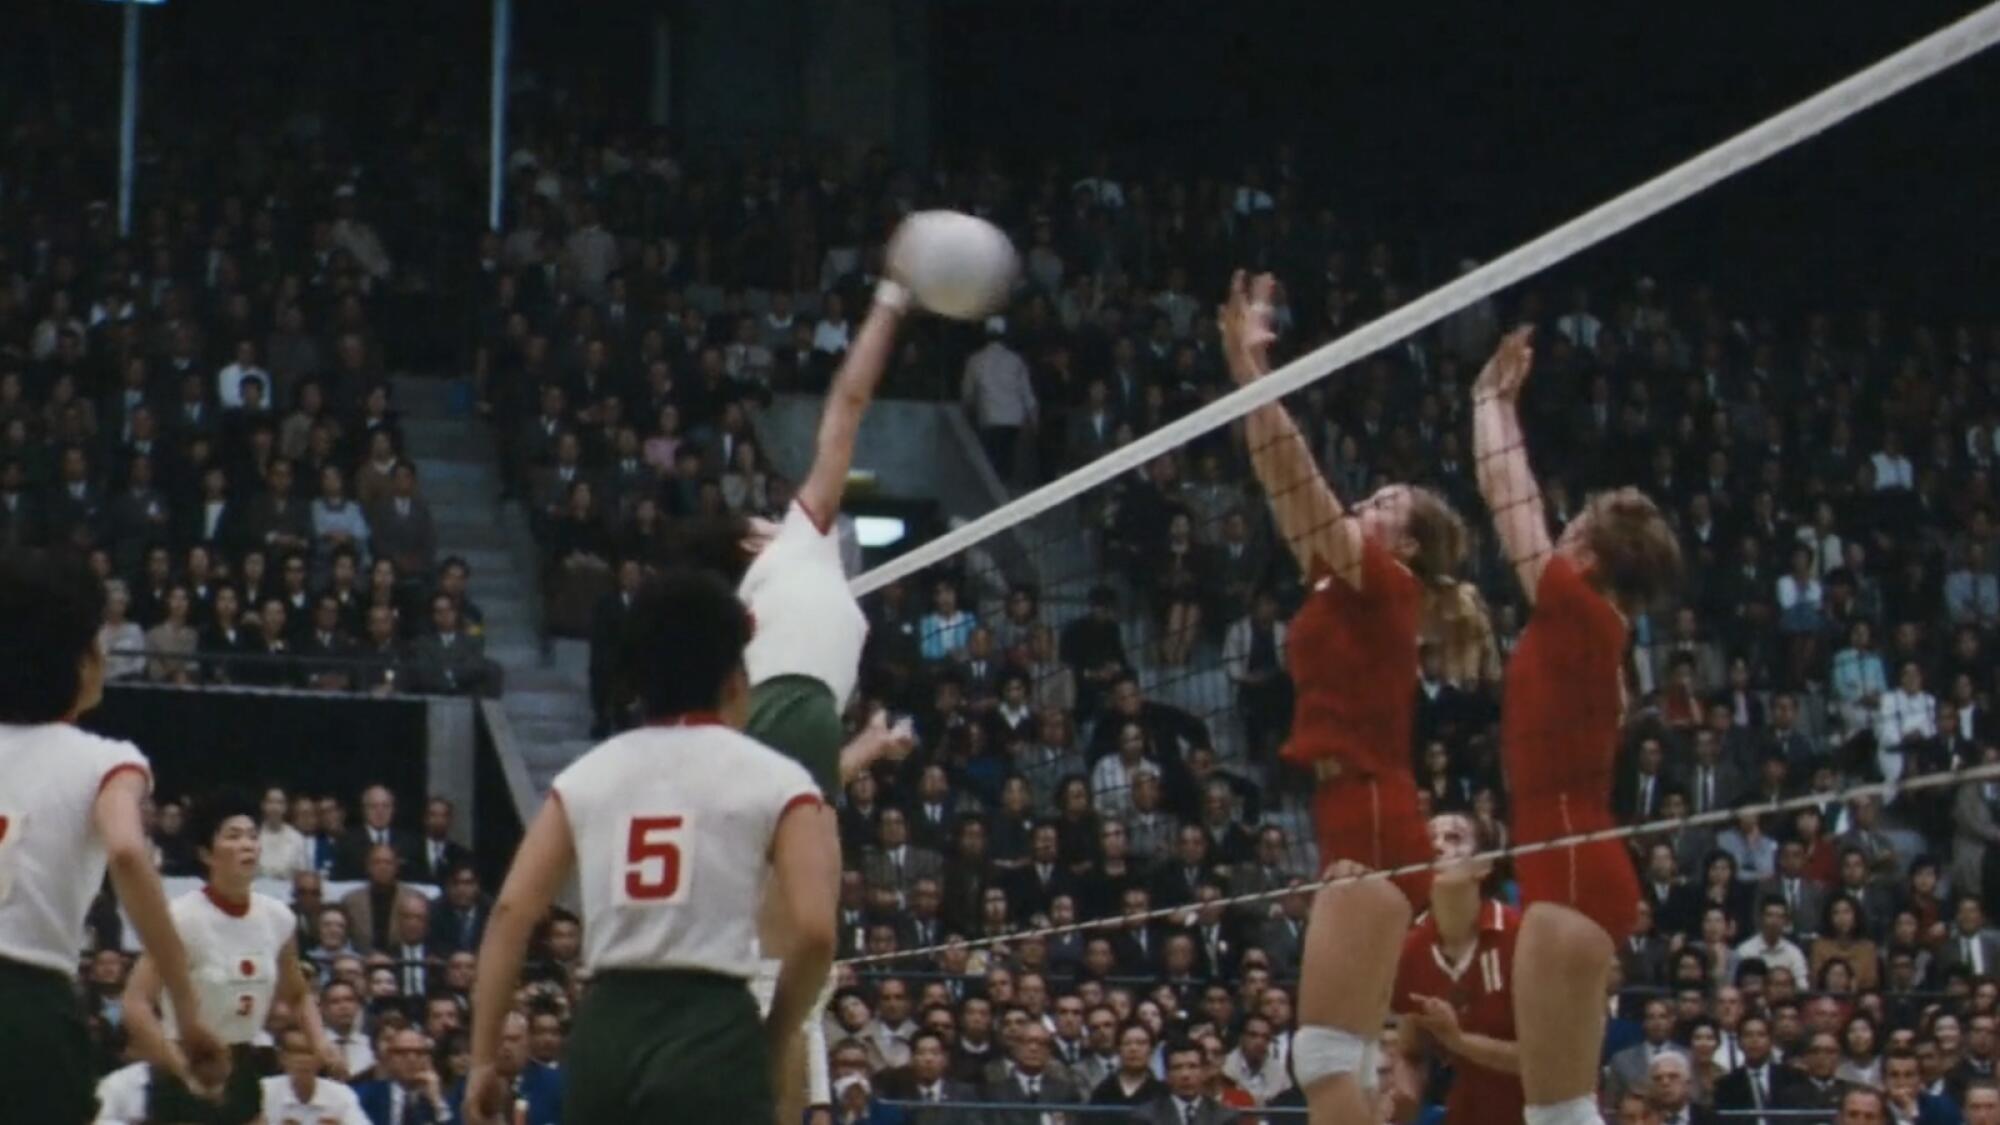 A volleyball player soars above the net to spike a ball 